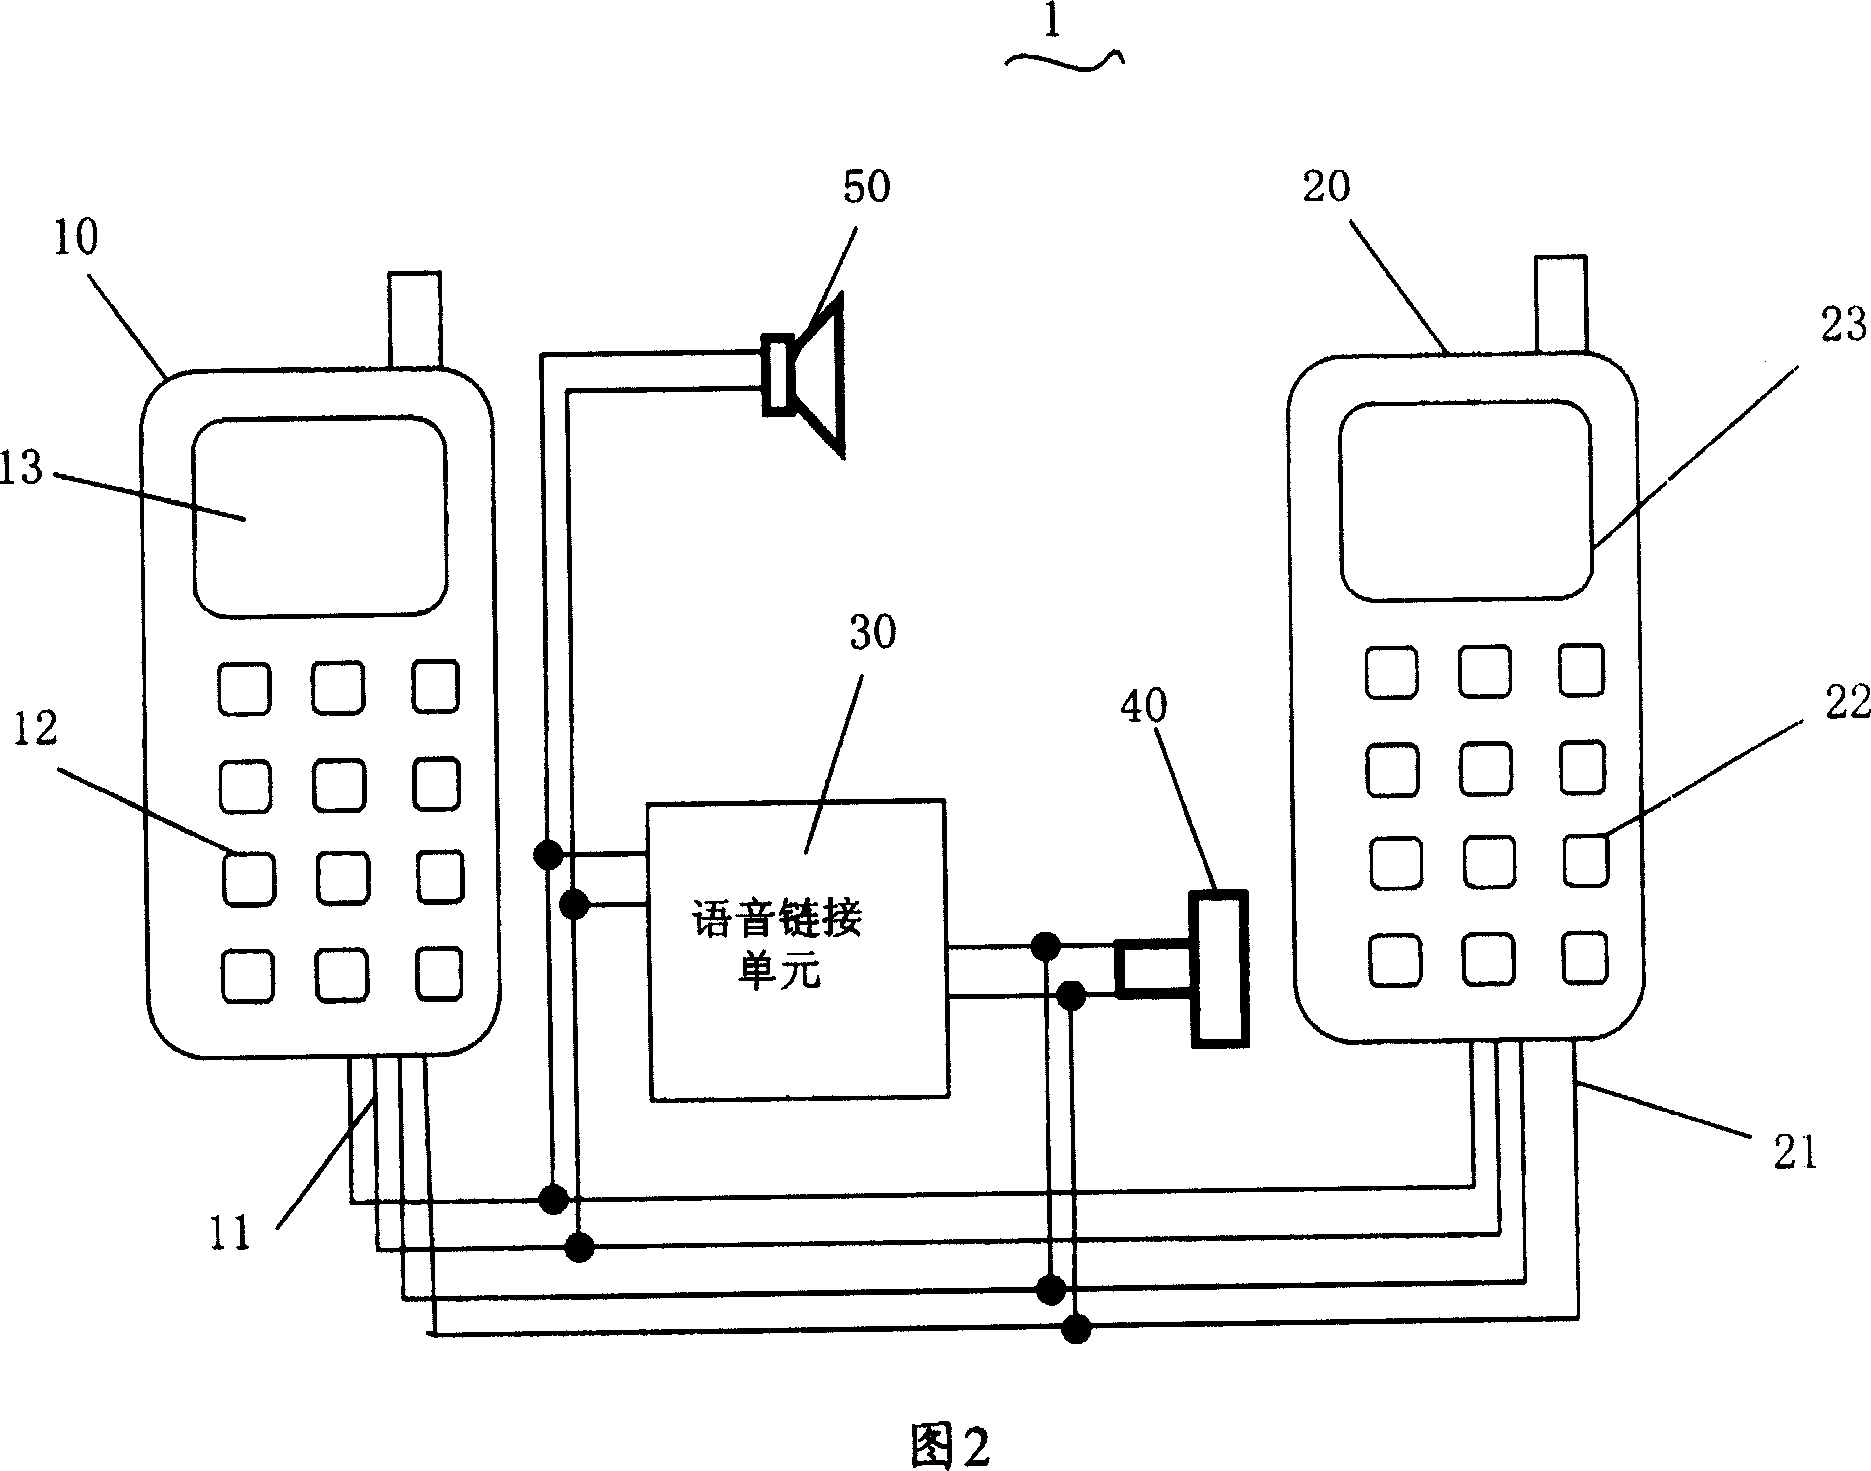 Portable device for communication among multiple parties